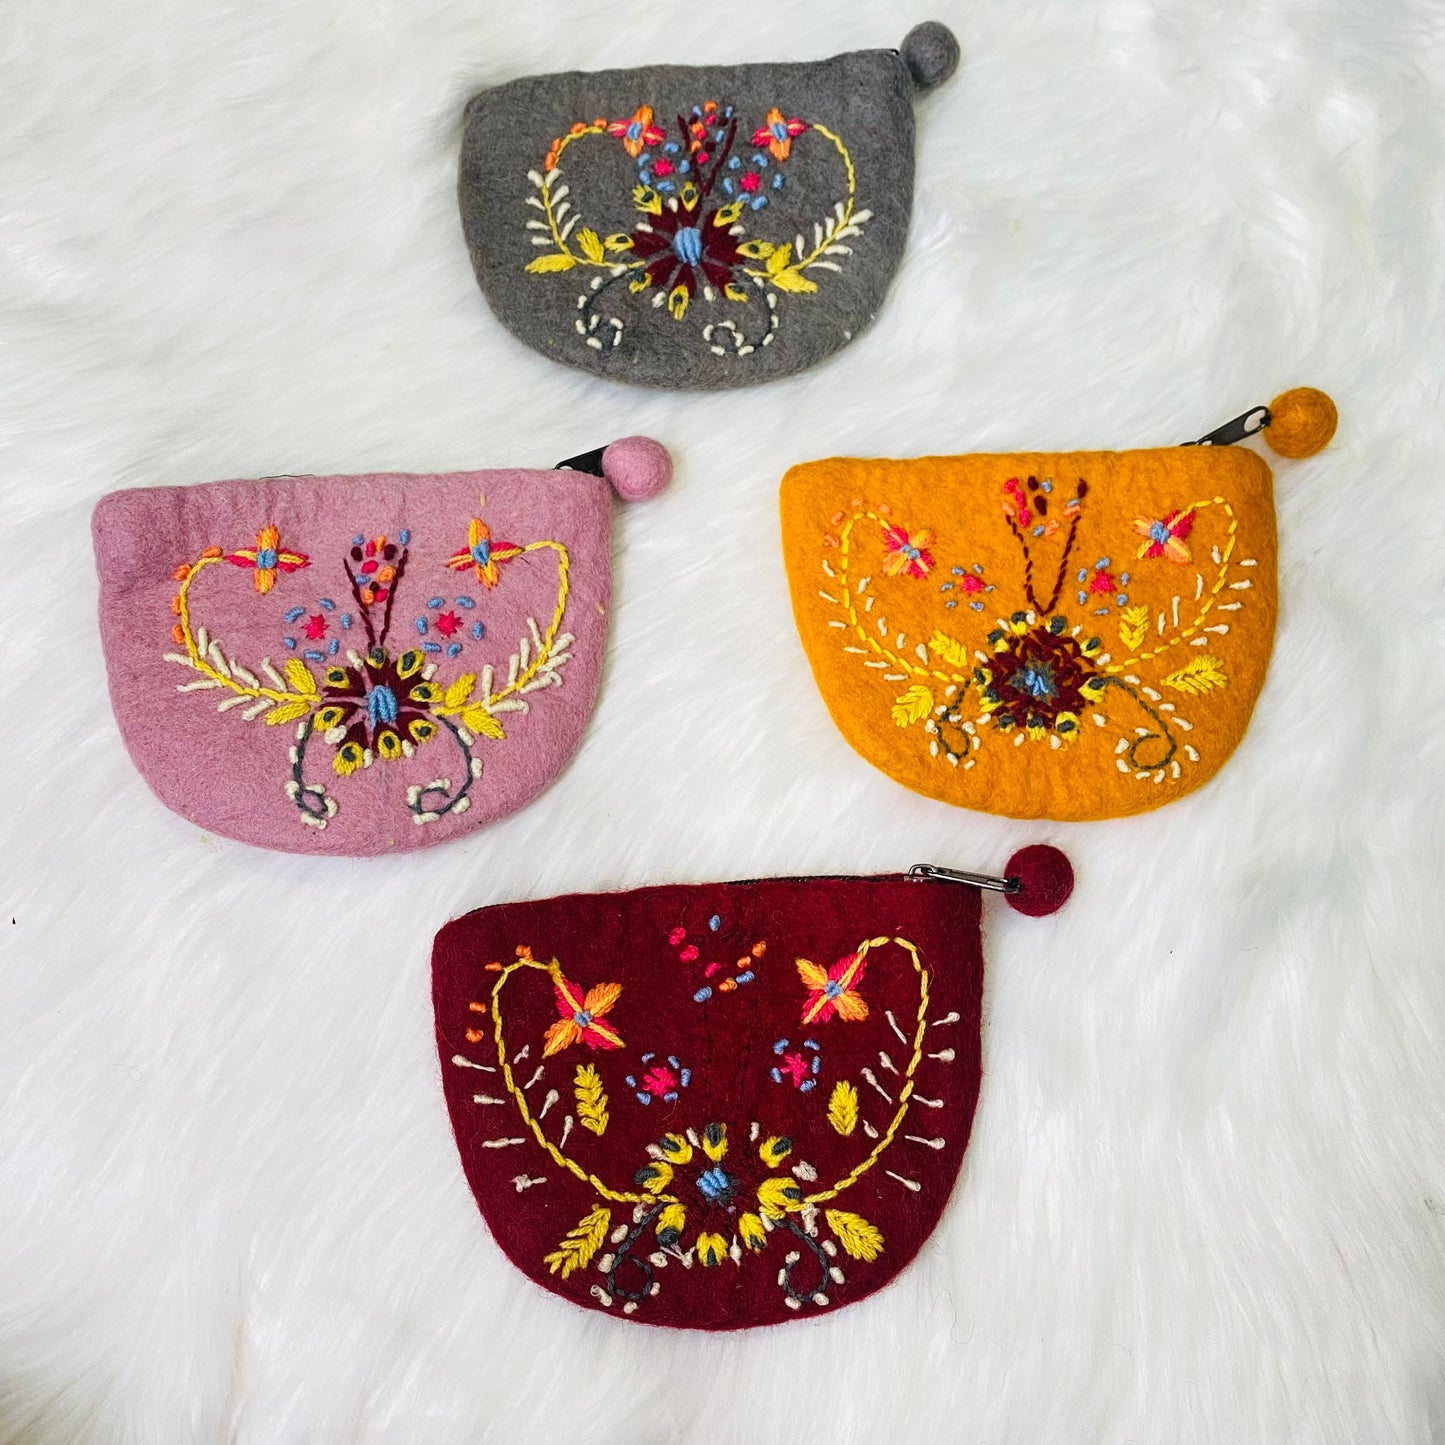 Handmade Felted Floral Embroidery Purse